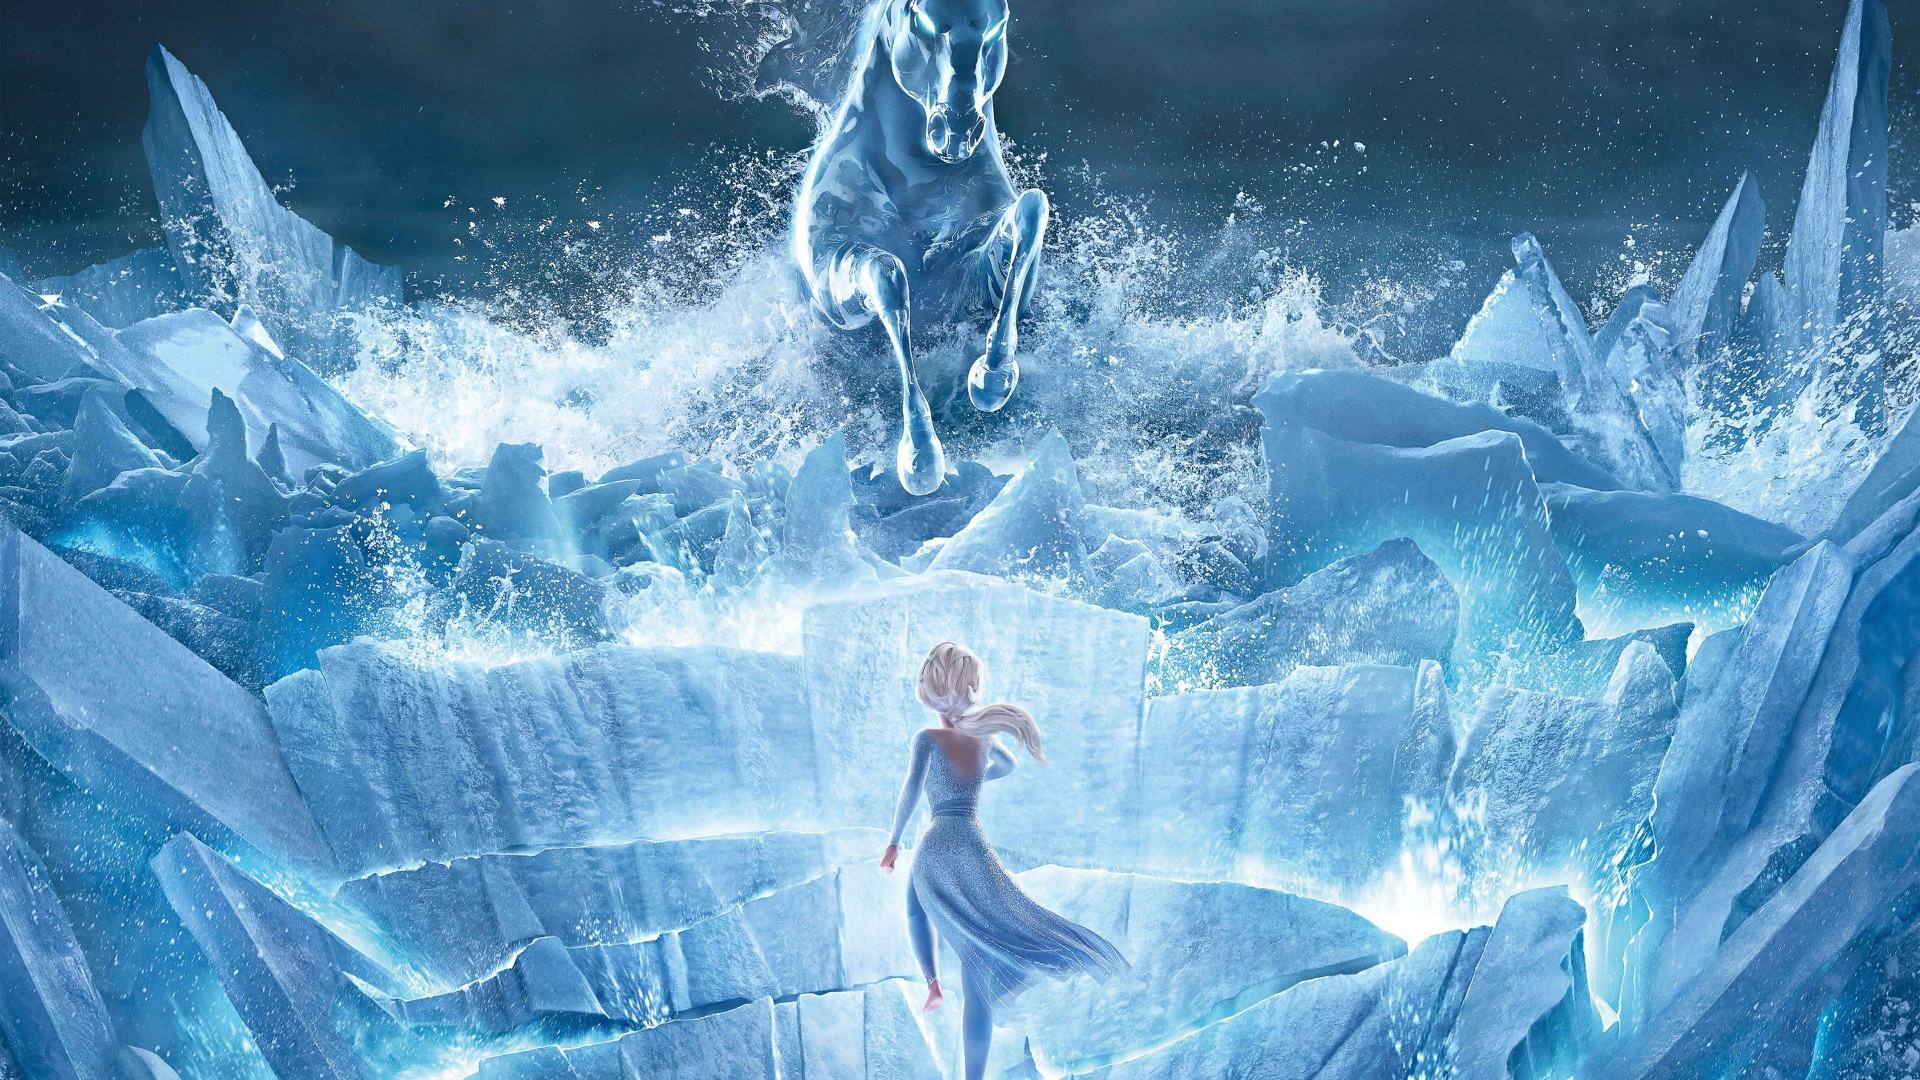 Elsa on an ice cliff with a horse